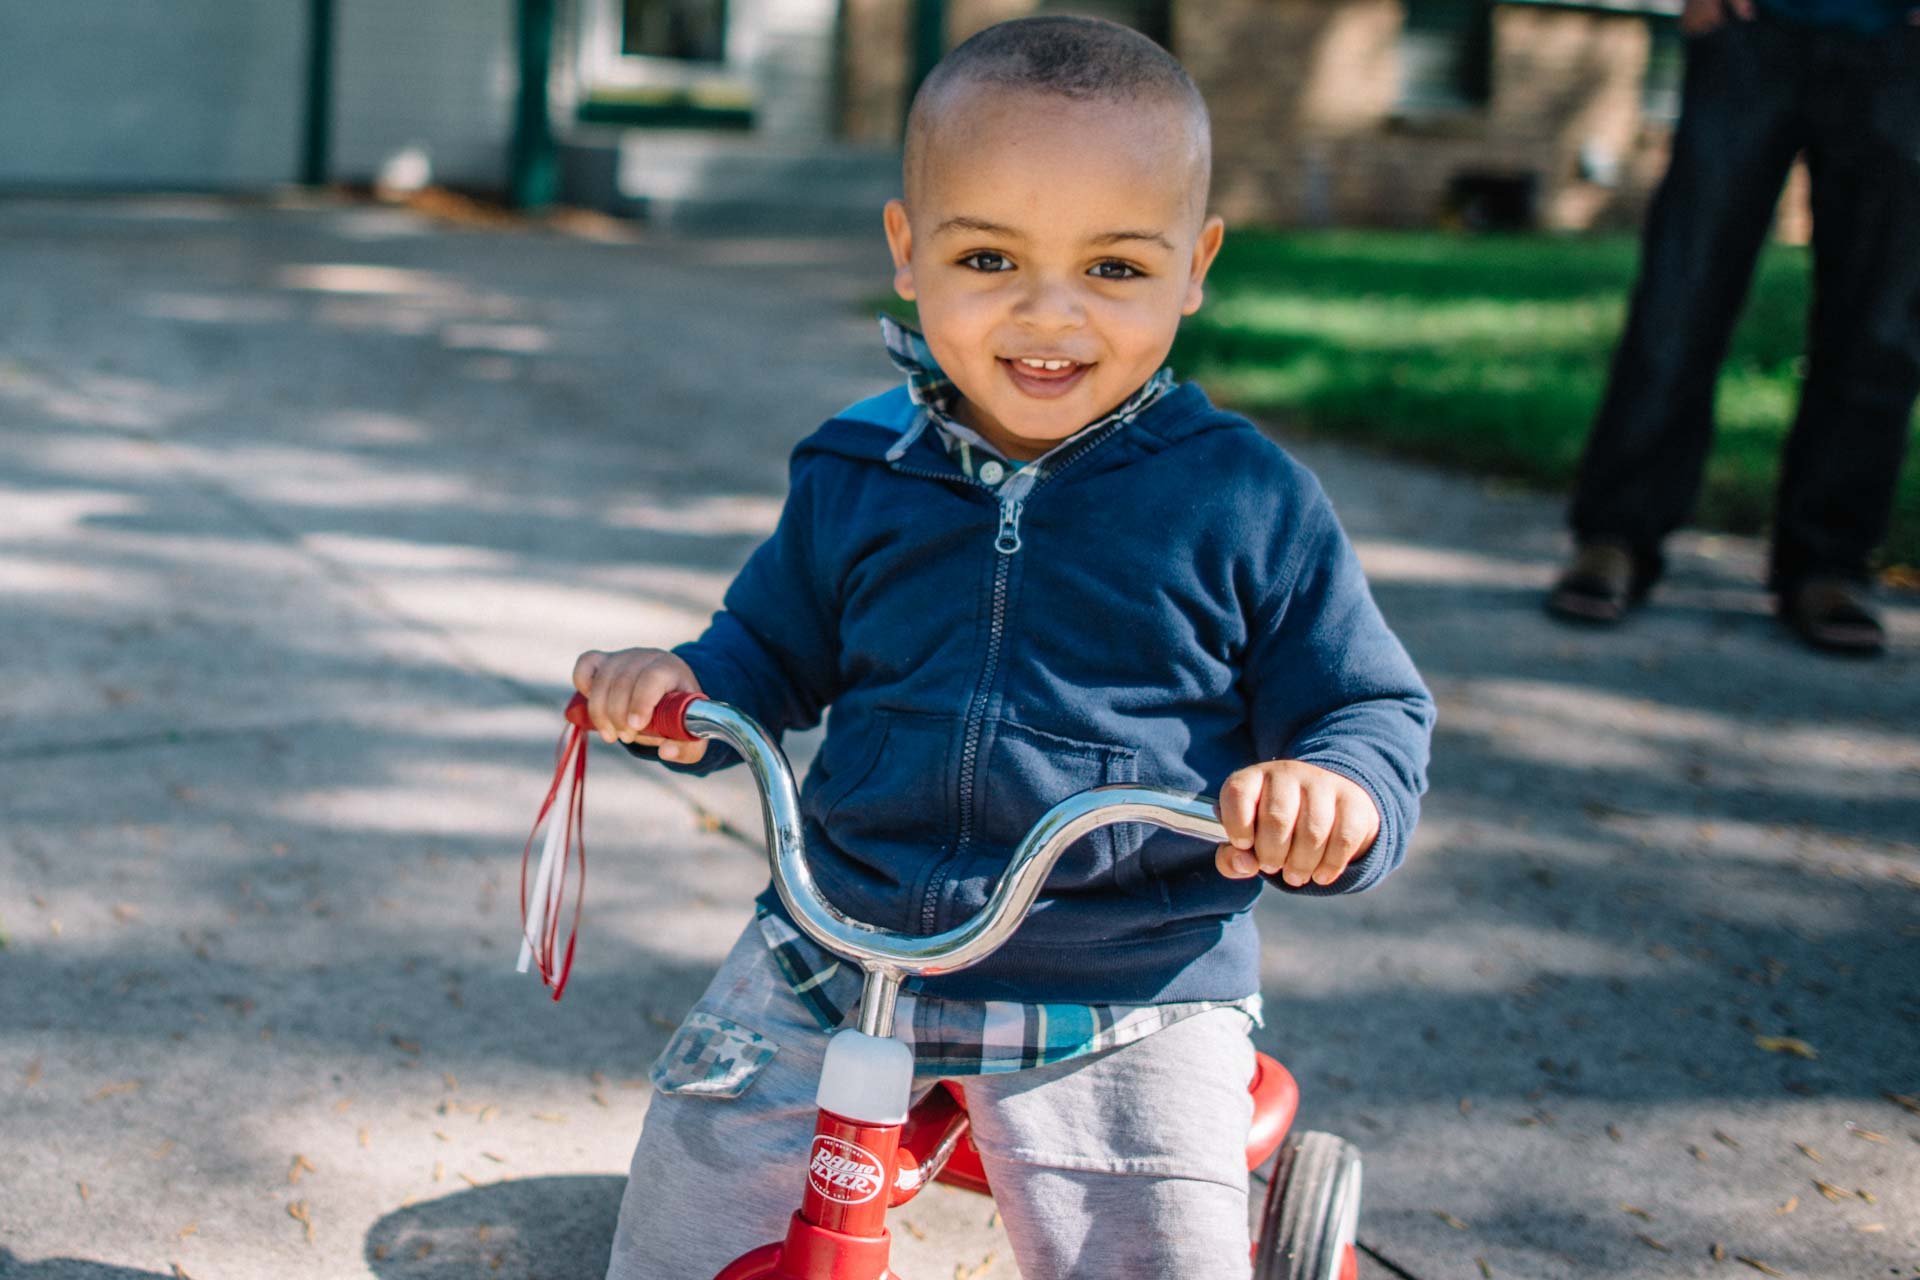 A young child smiling while riding a tricycle.